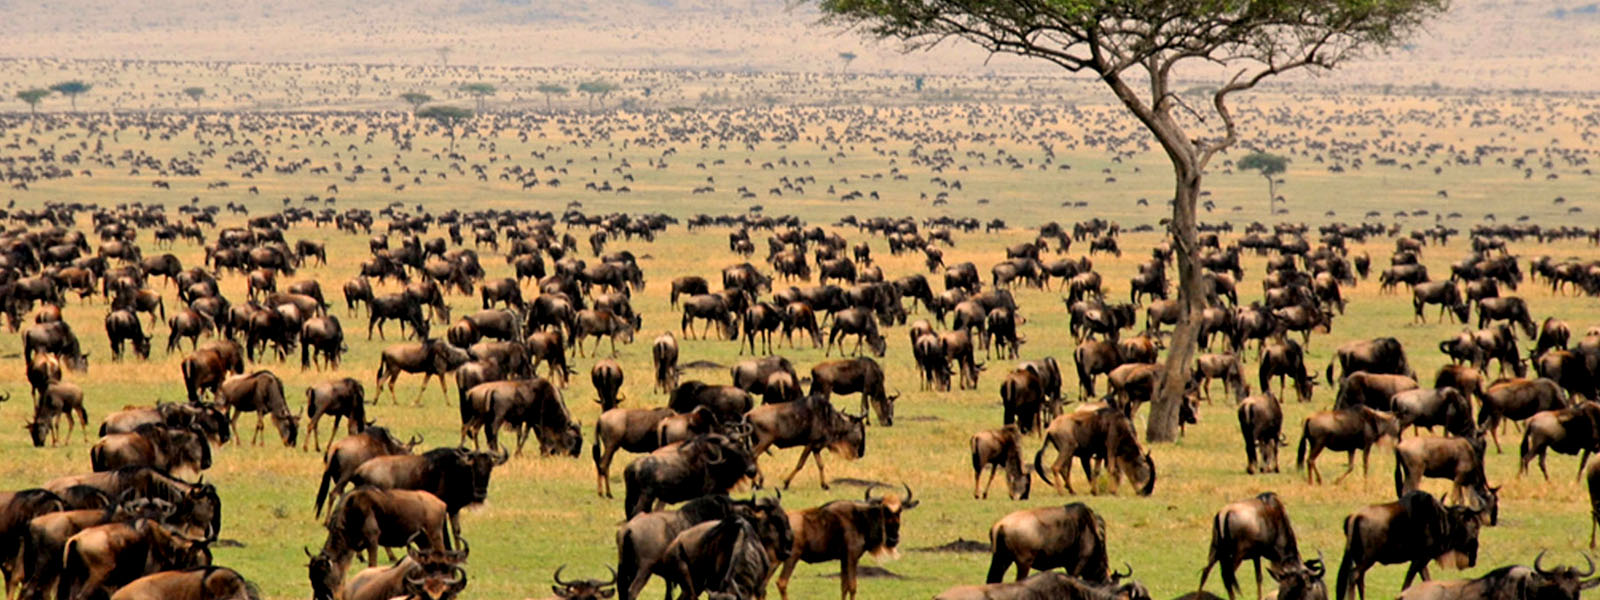 Amazing facts about Wildebeest migration